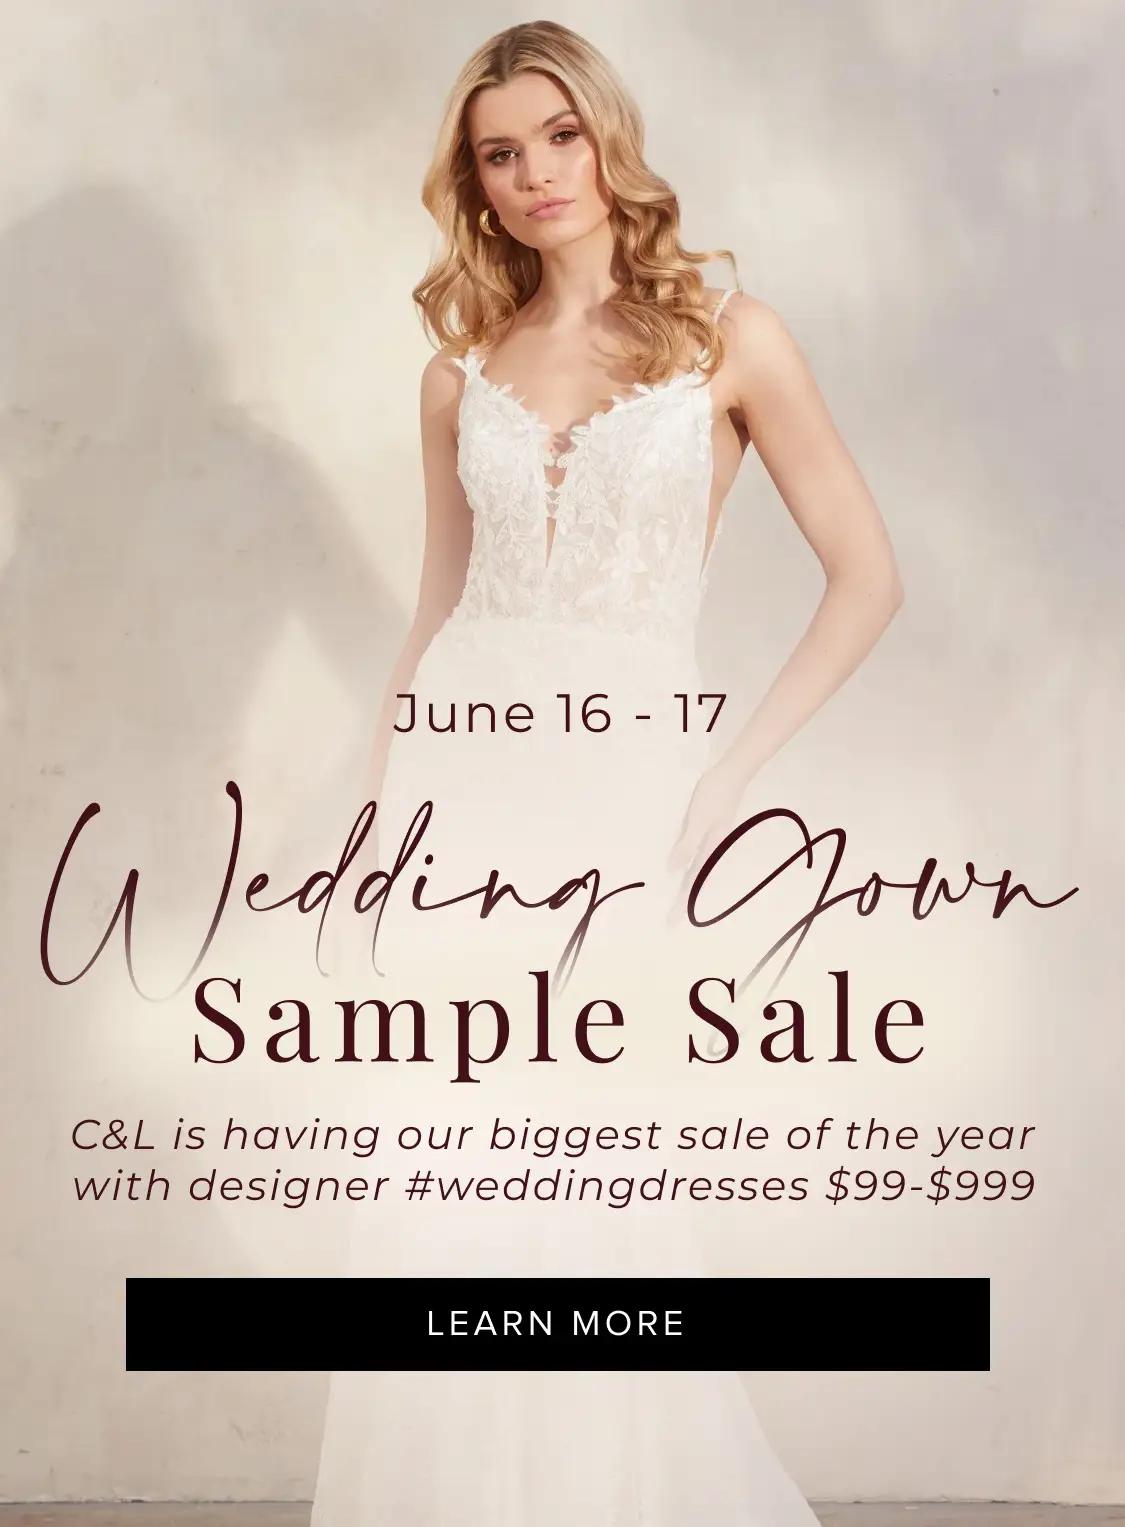 "Wedding Gown Sample Sale" banner for mobile